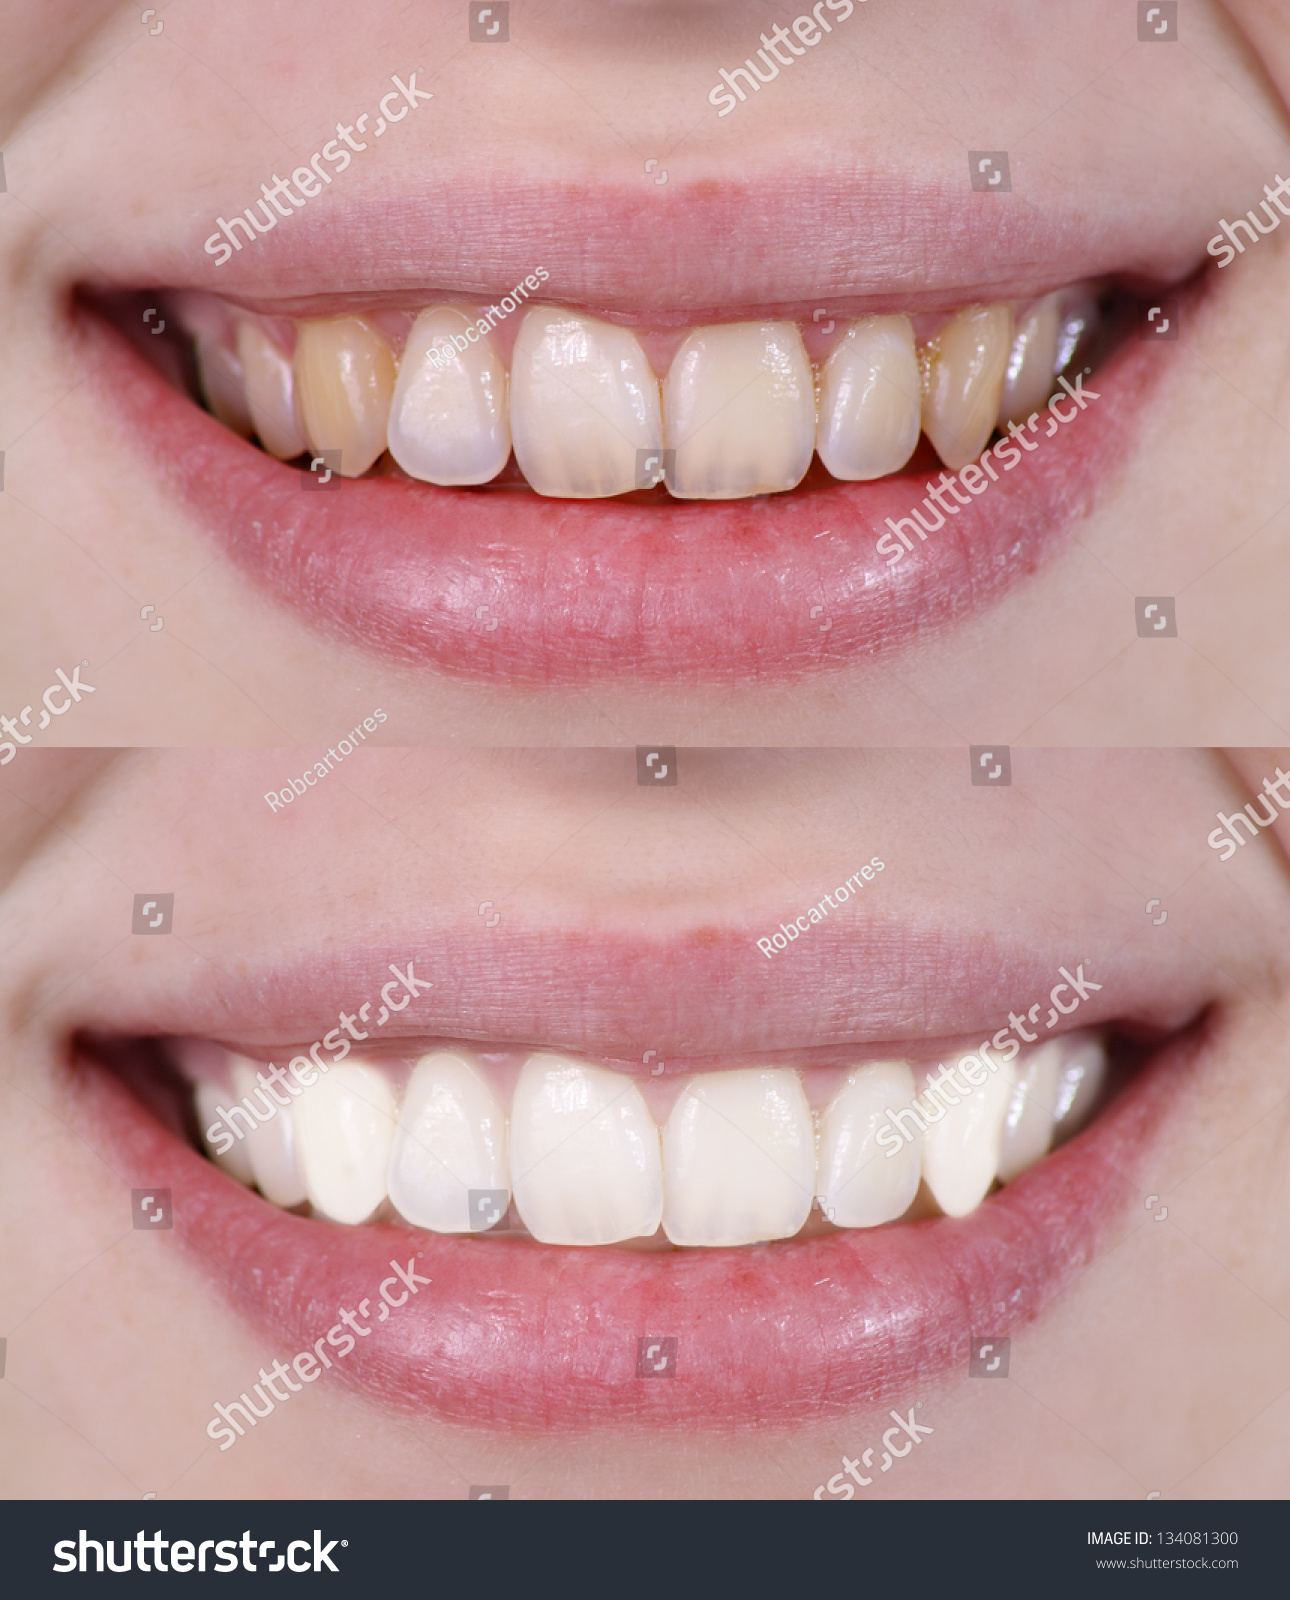 Before And After Dental Treatment Stock Photo 134081300 ...